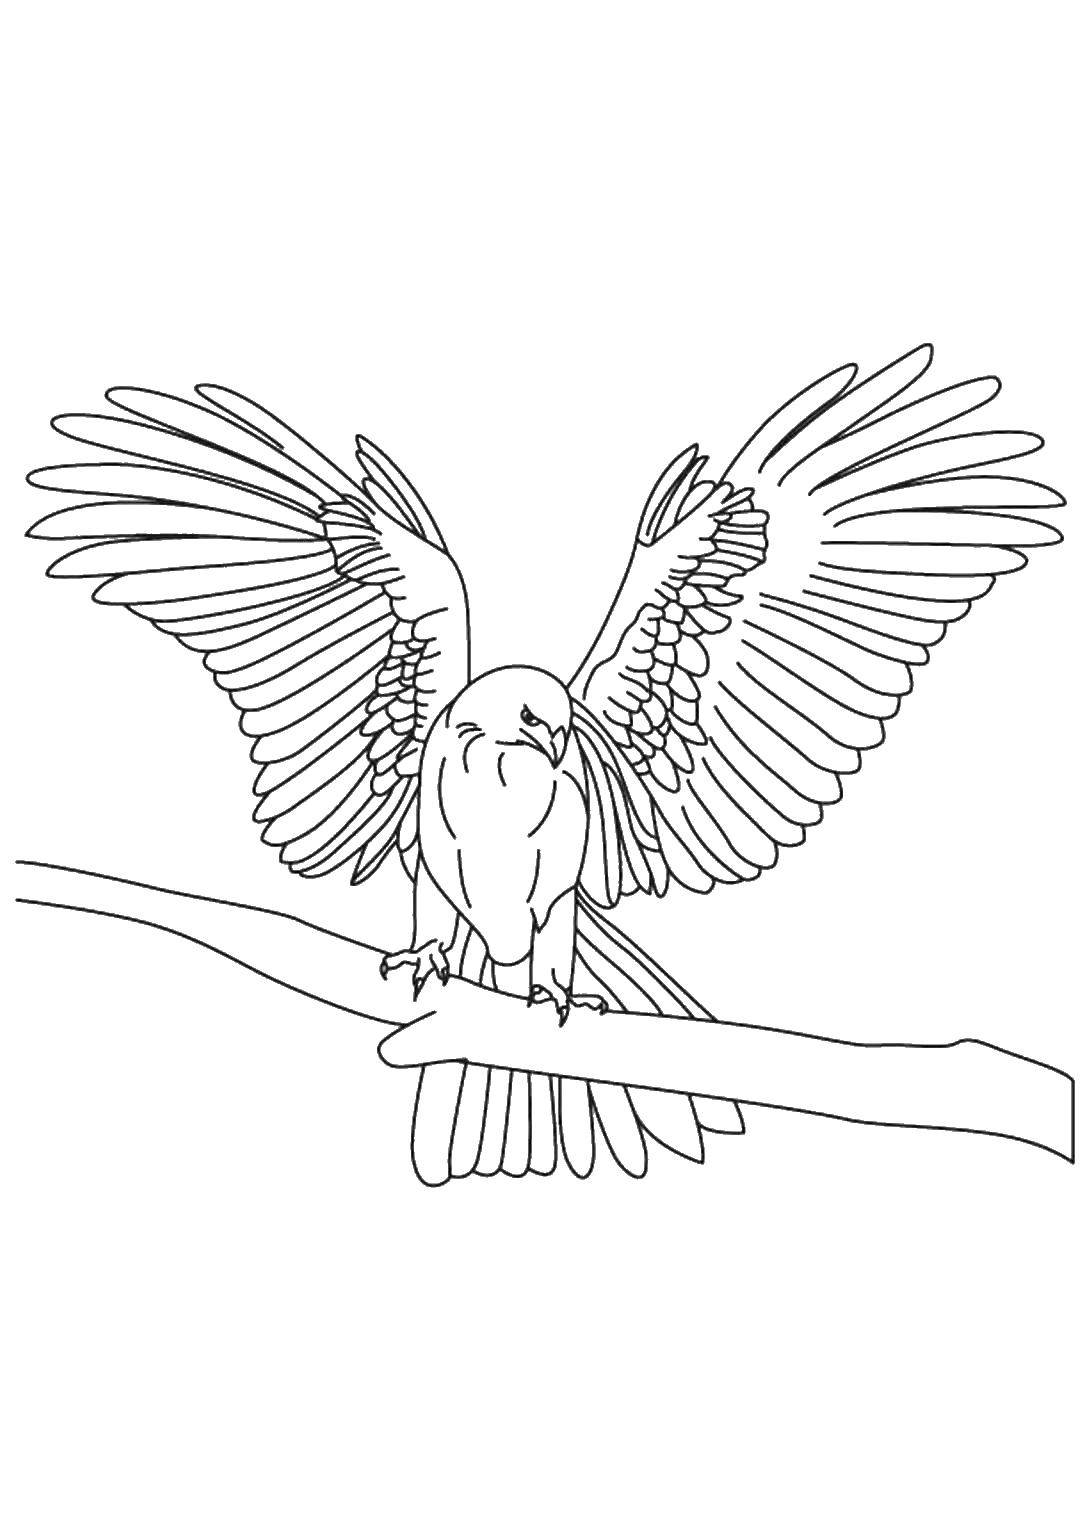 Coloring Eagle on a branch. Category birds. Tags:  birds, wings, orlf.